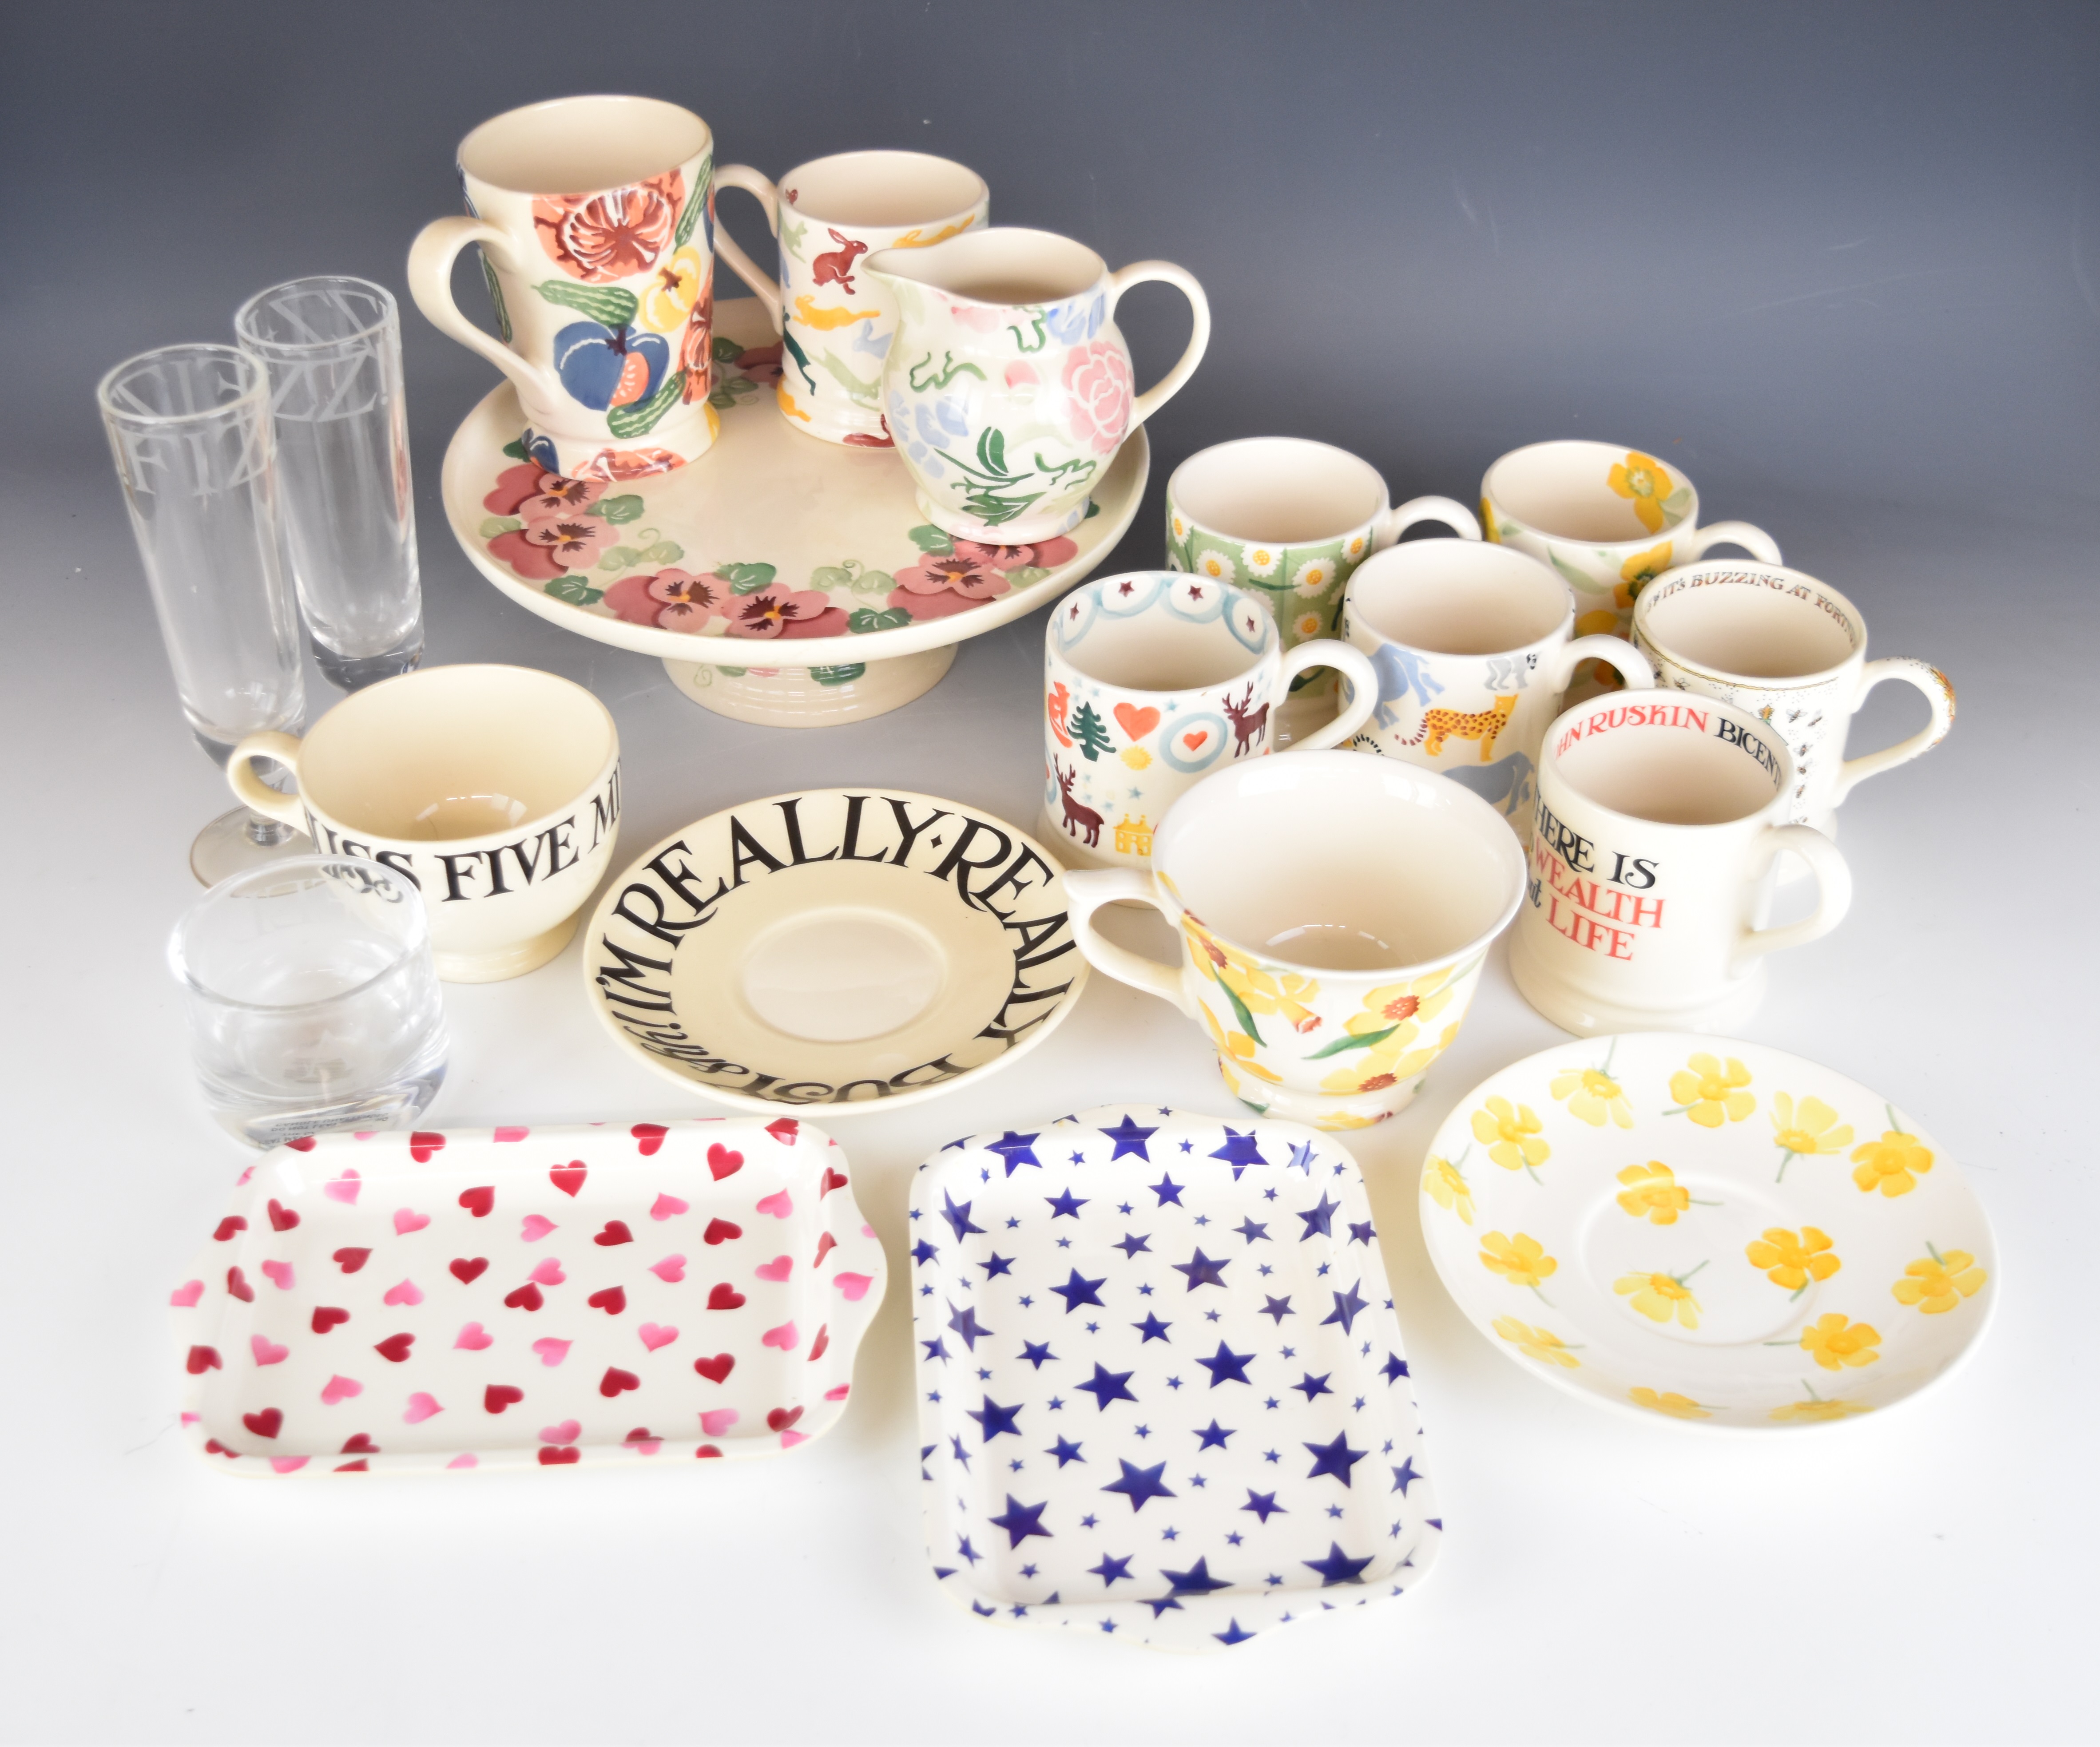 Emma Bridgewater ceramics including a tazza with pansy decoration, mugs, cups and saucers, glasses - Image 10 of 18